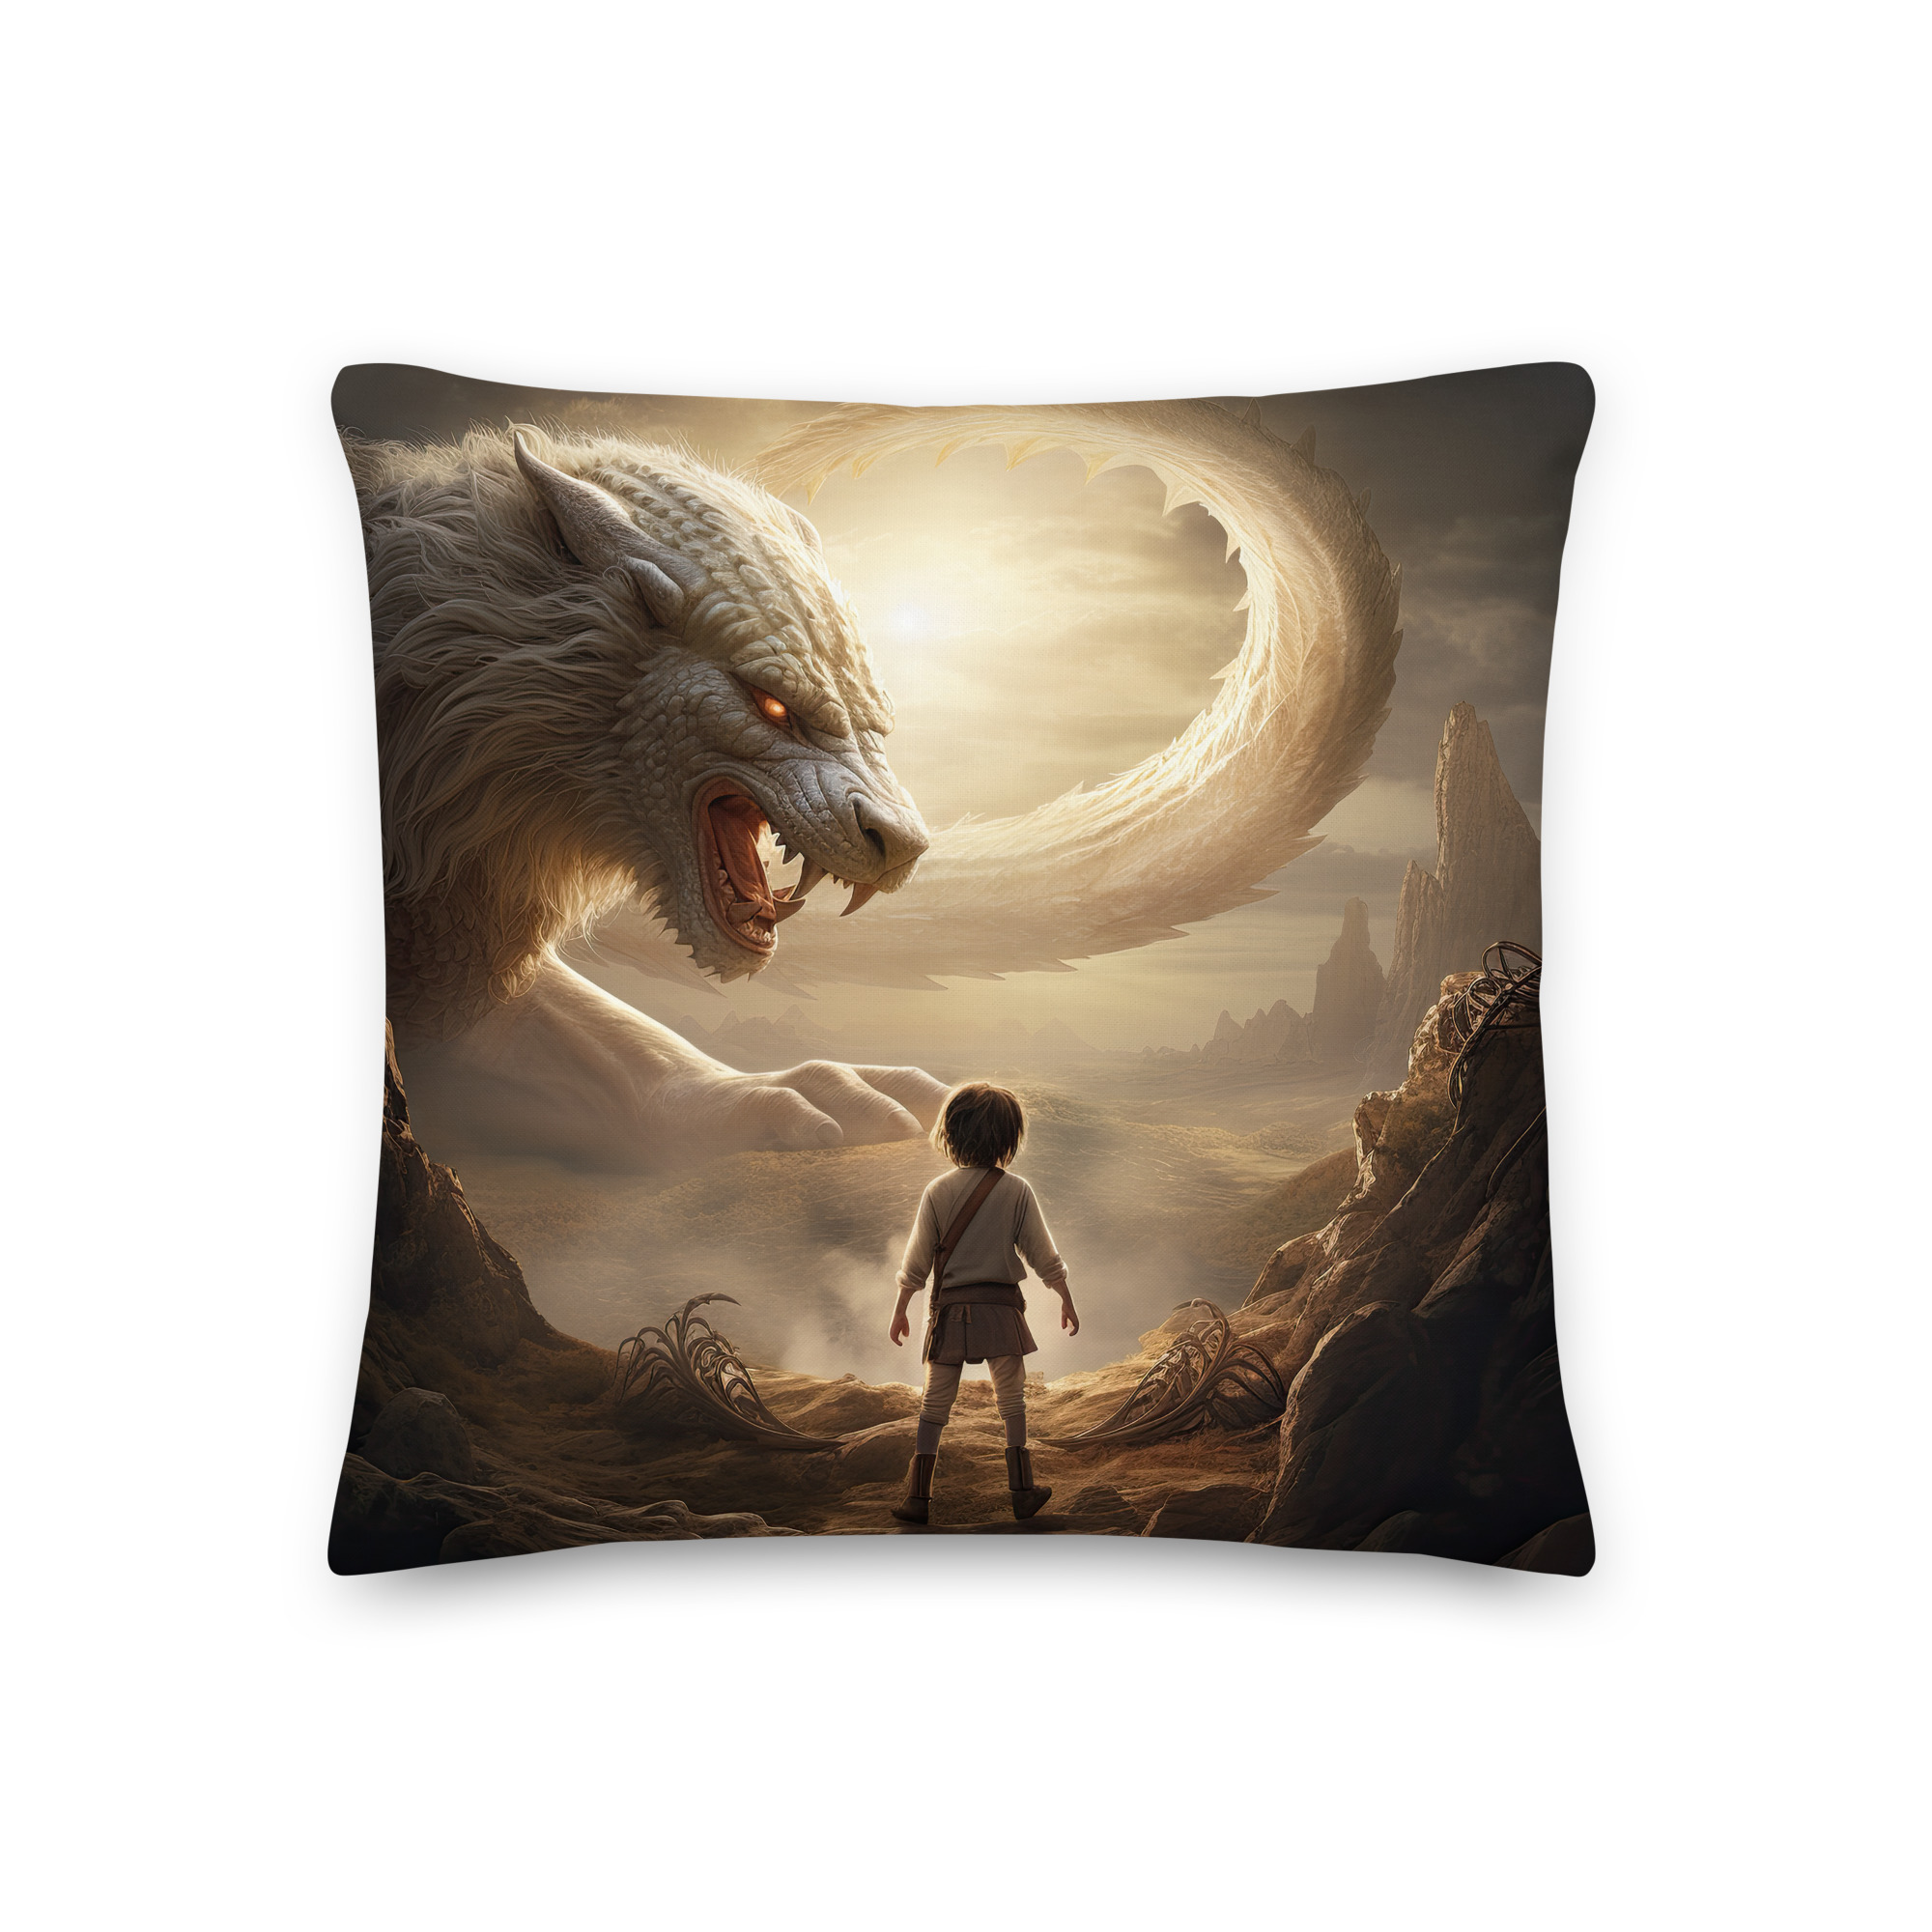 The Boy and the Chimera Throw Pillow - 18×18